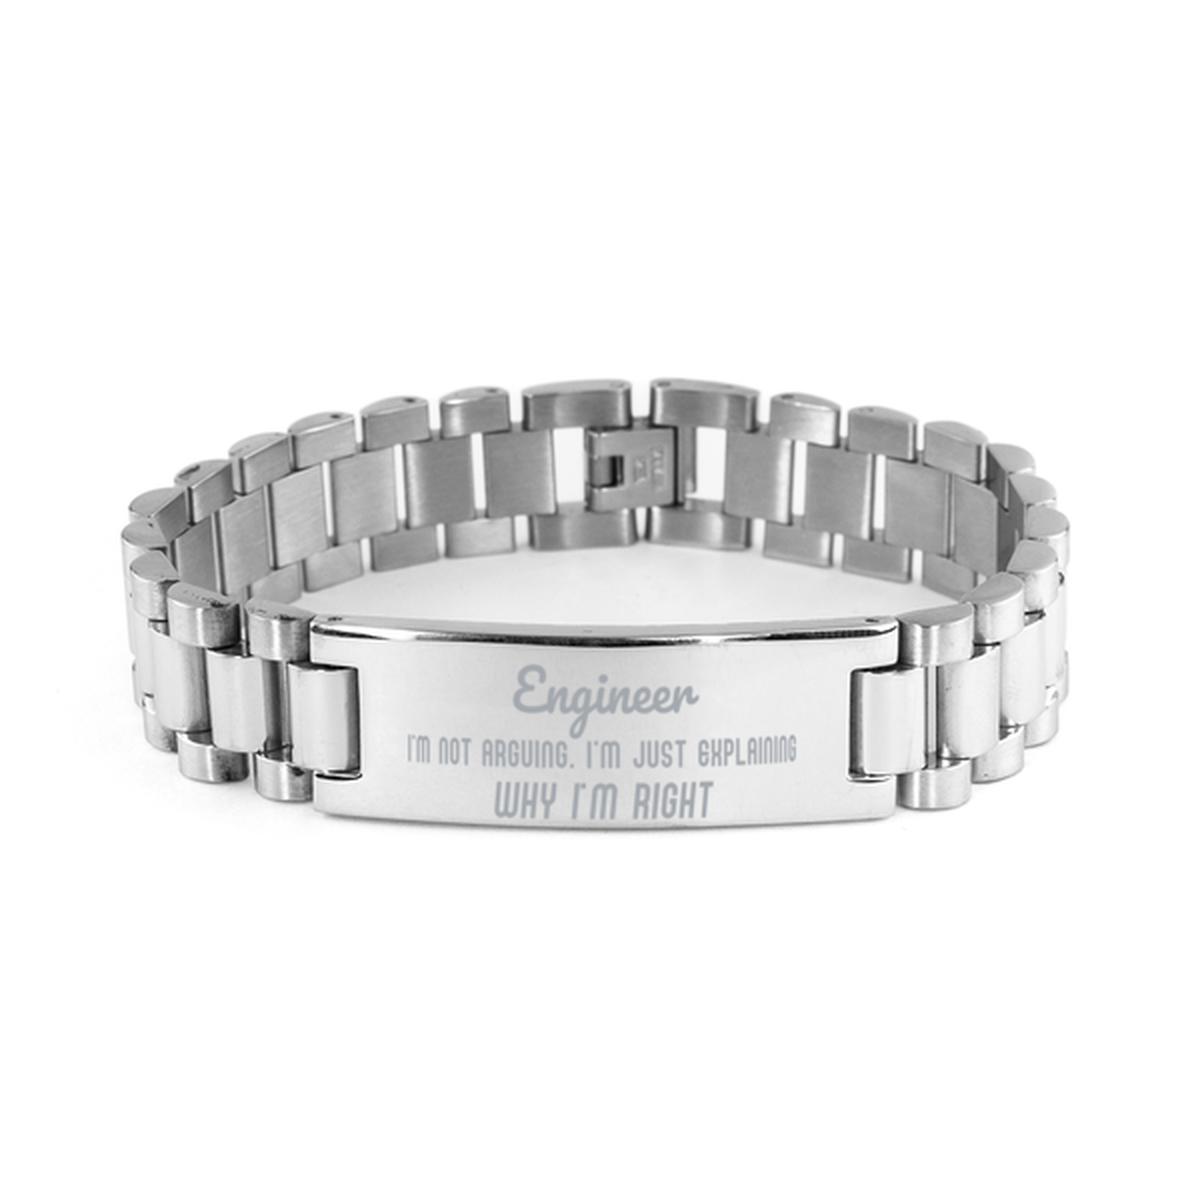 Engineer I'm not Arguing. I'm Just Explaining Why I'm RIGHT Ladder Stainless Steel Bracelet, Graduation Birthday Christmas Engineer Gifts For Engineer Funny Saying Quote Present for Men Women Coworker